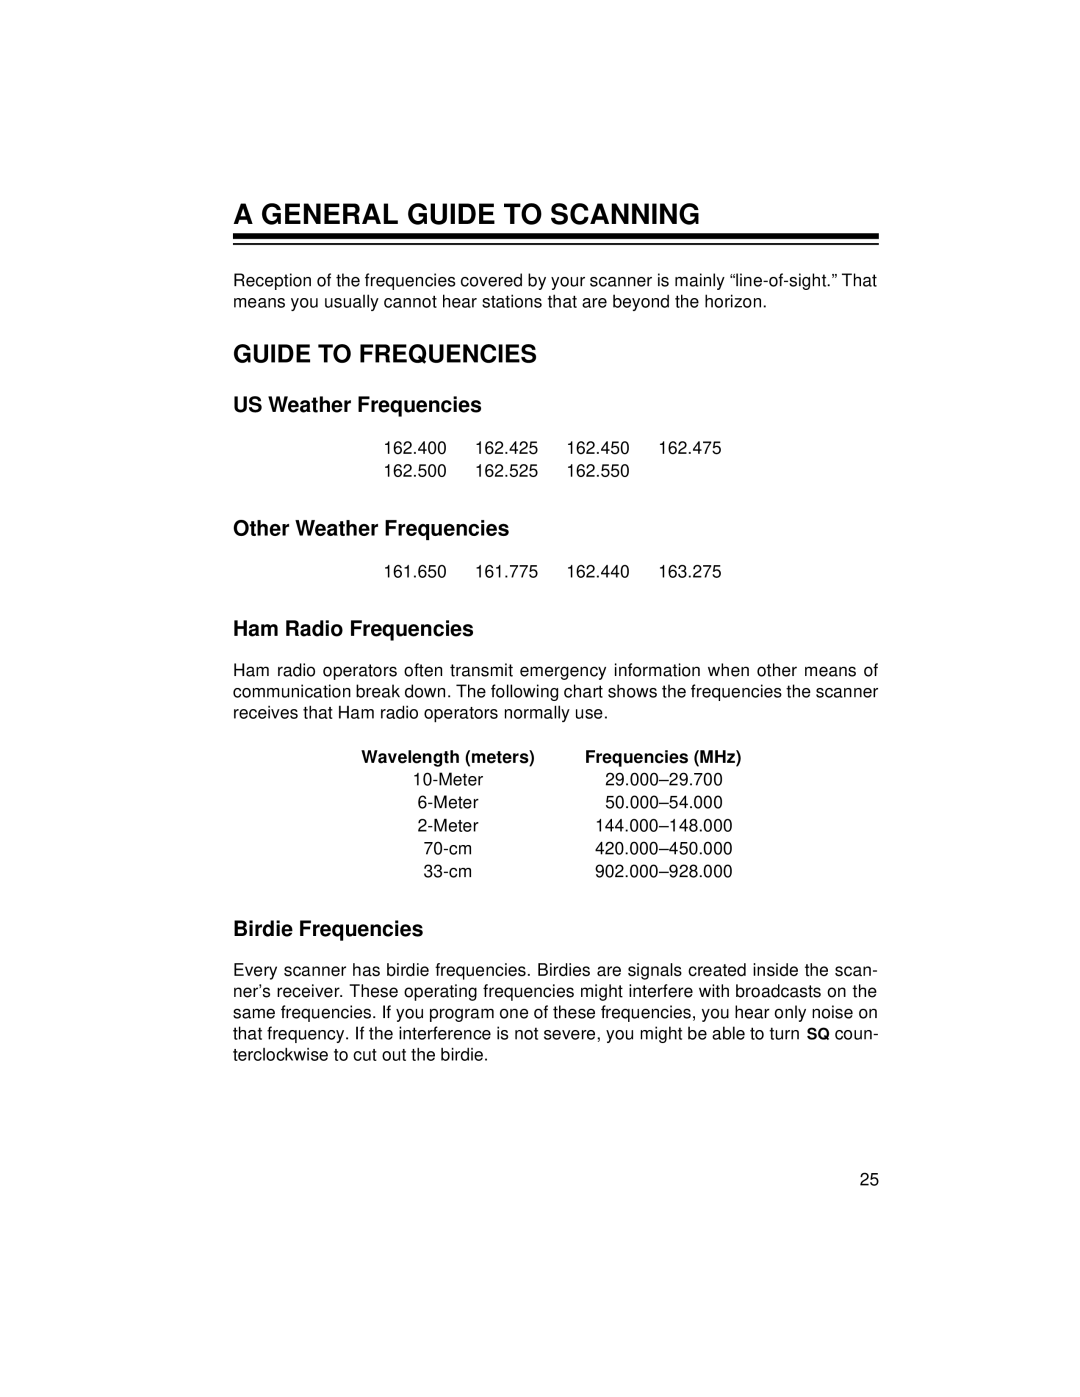 Radio Shack PRO-2056 A General Guide To Scanning, Guide To Frequencies, US Weather Frequencies, Other Weather Frequencies 